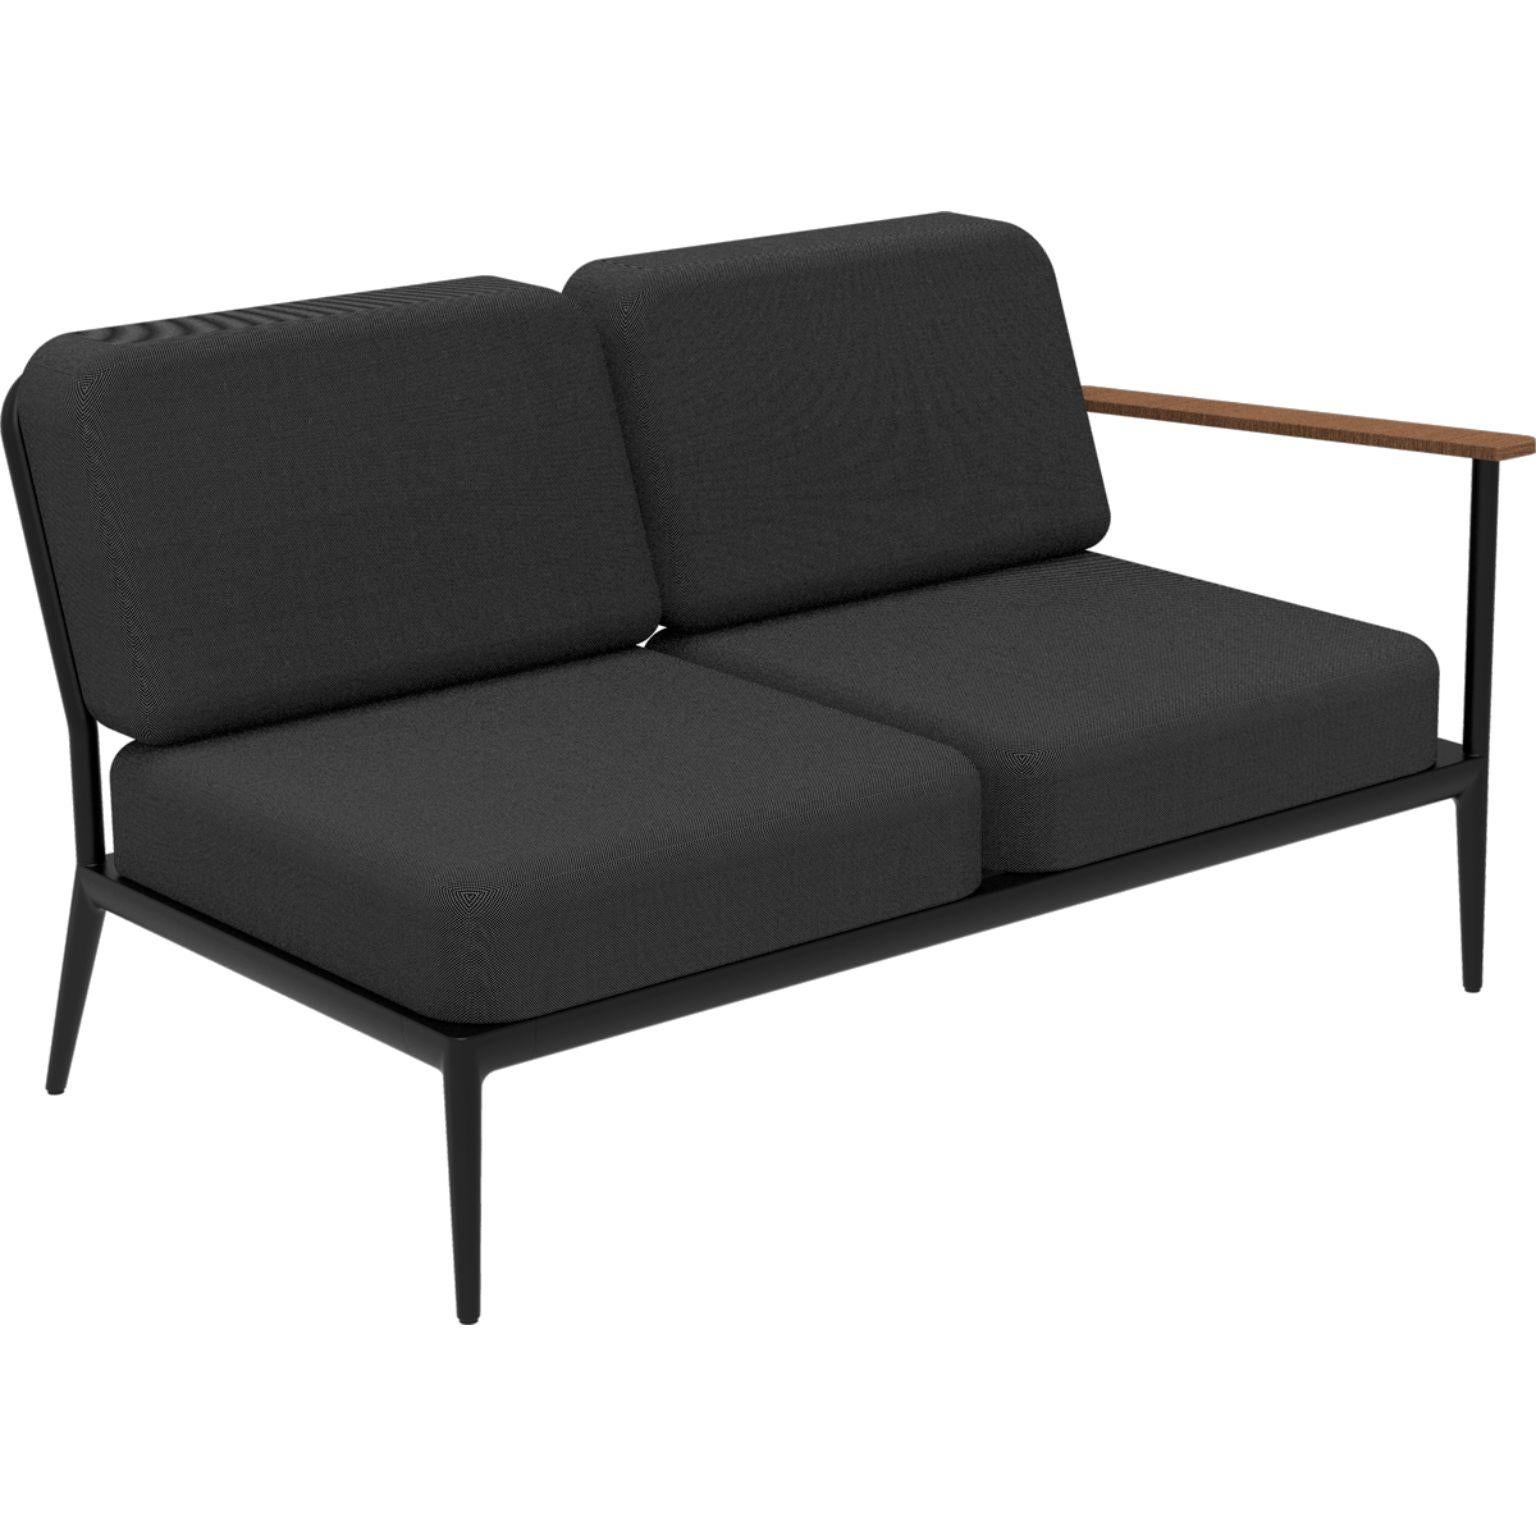 Nature Black Double Left modular sofa by MOWEE
Dimensions: D85 x W144 x H81 cm (seat height 42 cm).
Material: Aluminum, upholstery and Iroko Wood.
Weight: 29 kg.
Also available in different colors and finishes.

An unmistakable collection for